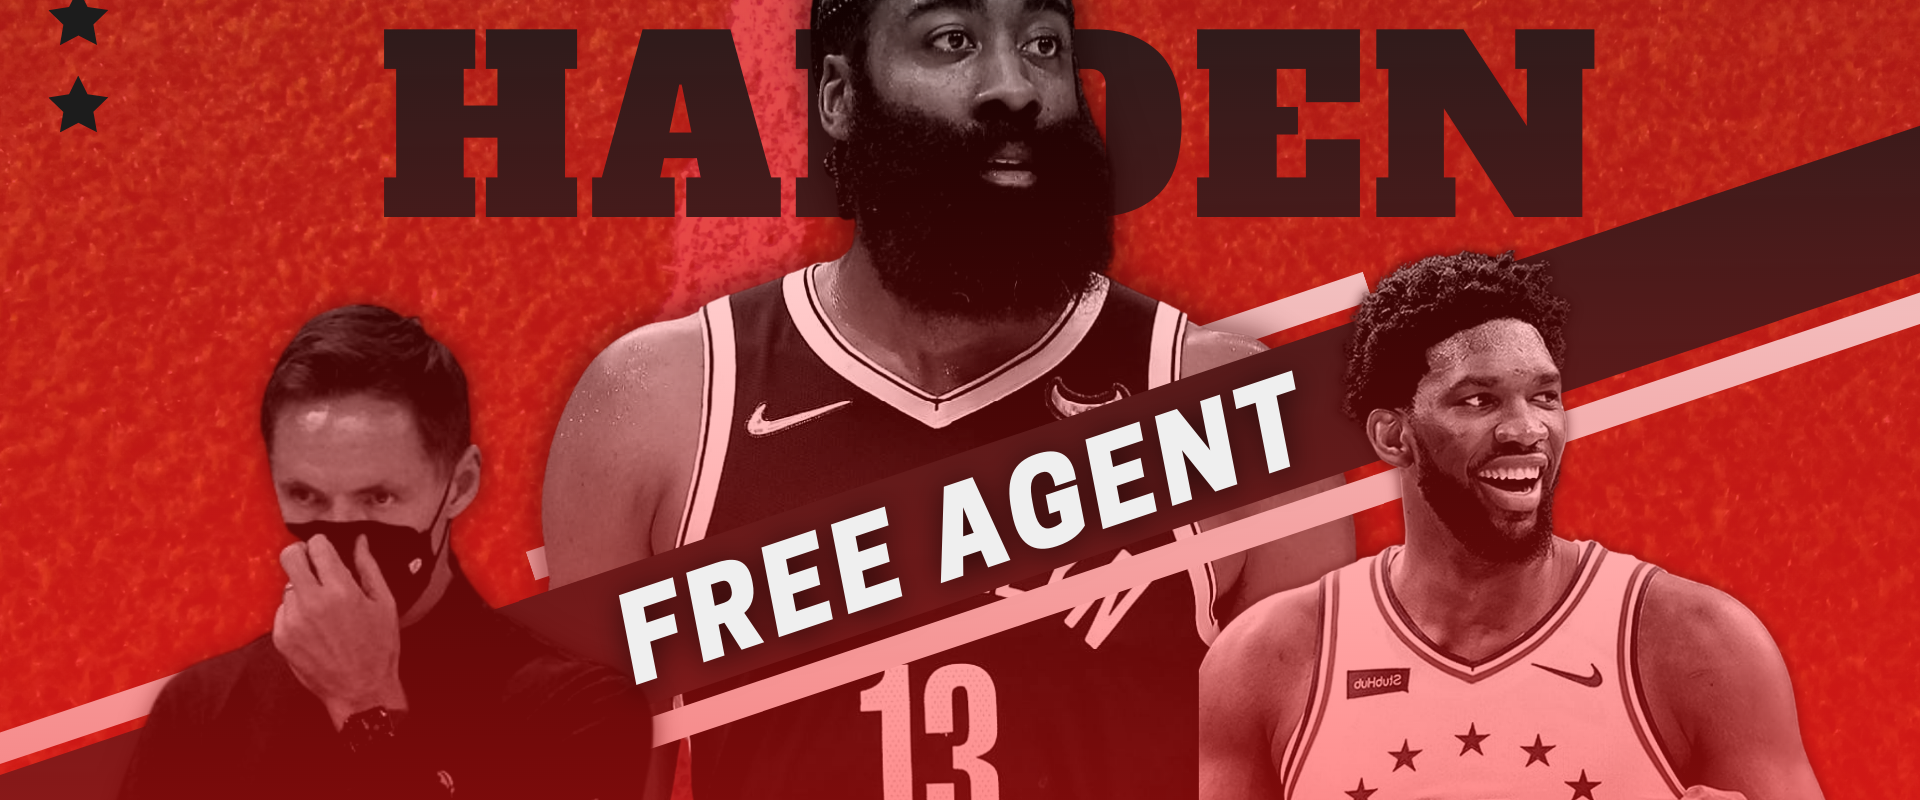 1920x1080_James Harden To Become a Free Agent Next Season